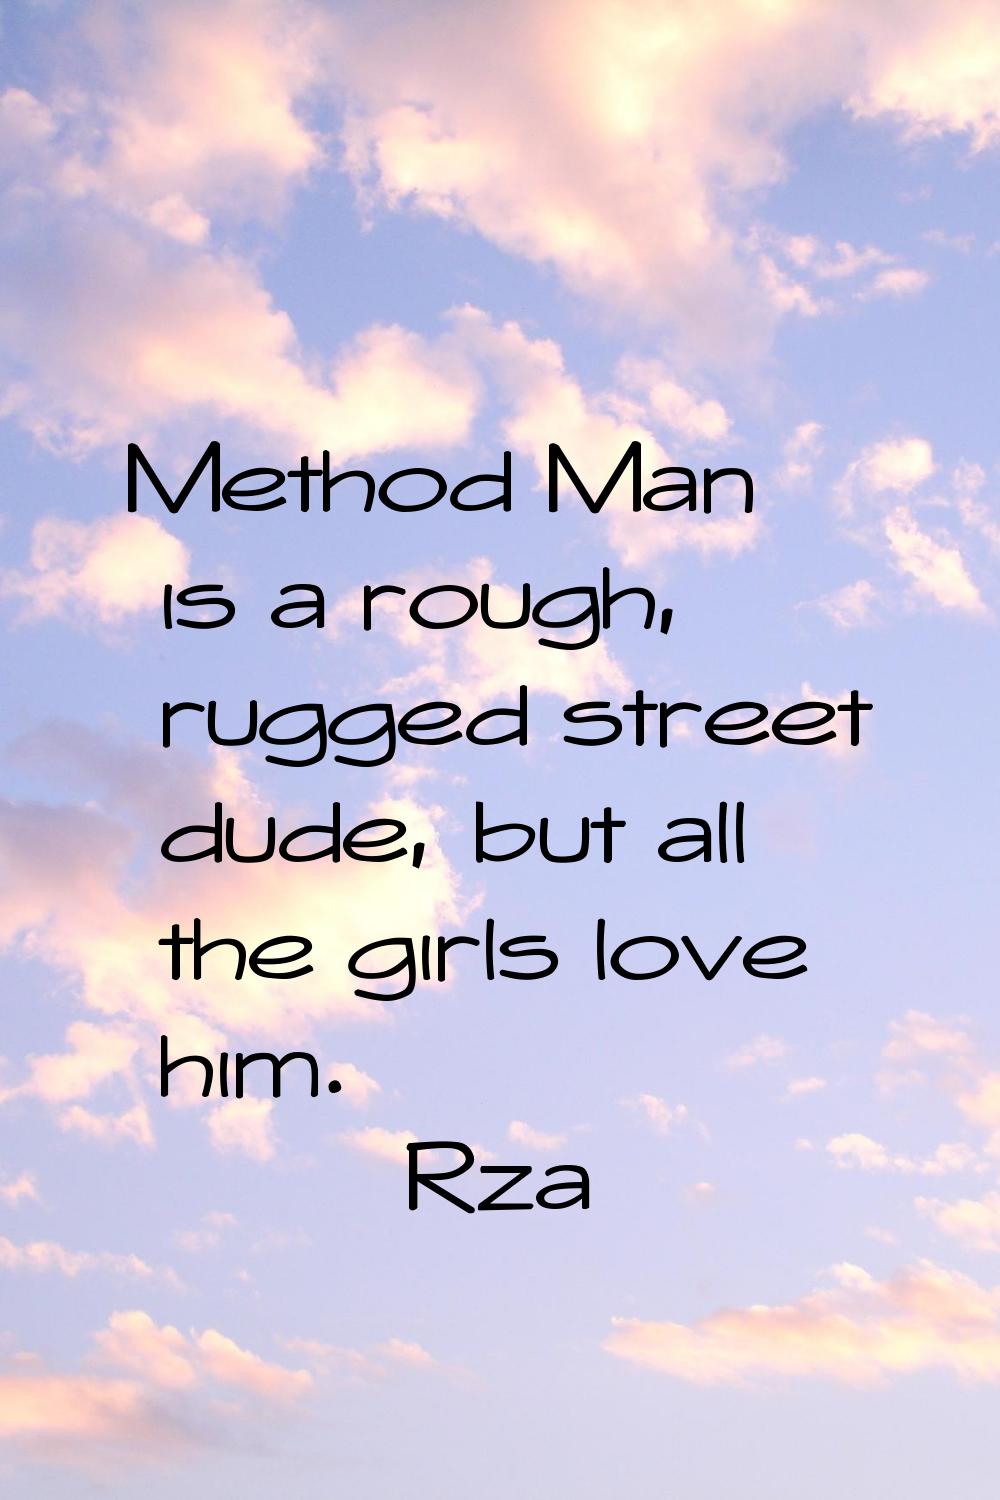 Method Man is a rough, rugged street dude, but all the girls love him.